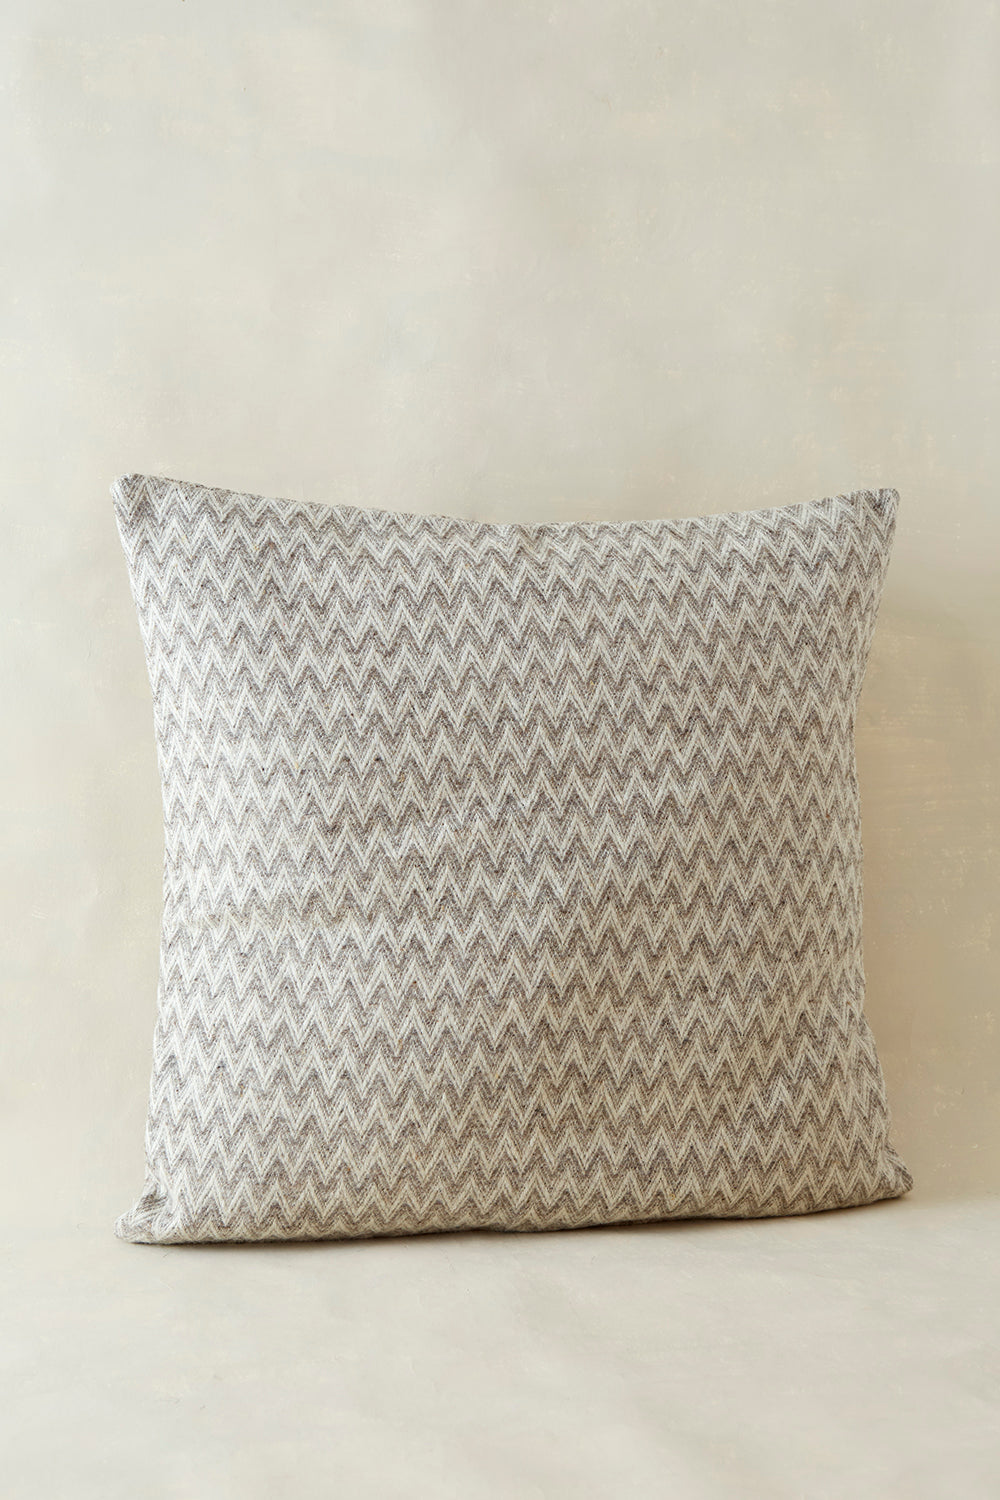 Artisan & Fox - Home Goods - Chevron Shuttle Loom Wool Cushion Cover - Handcrafted in Mexico